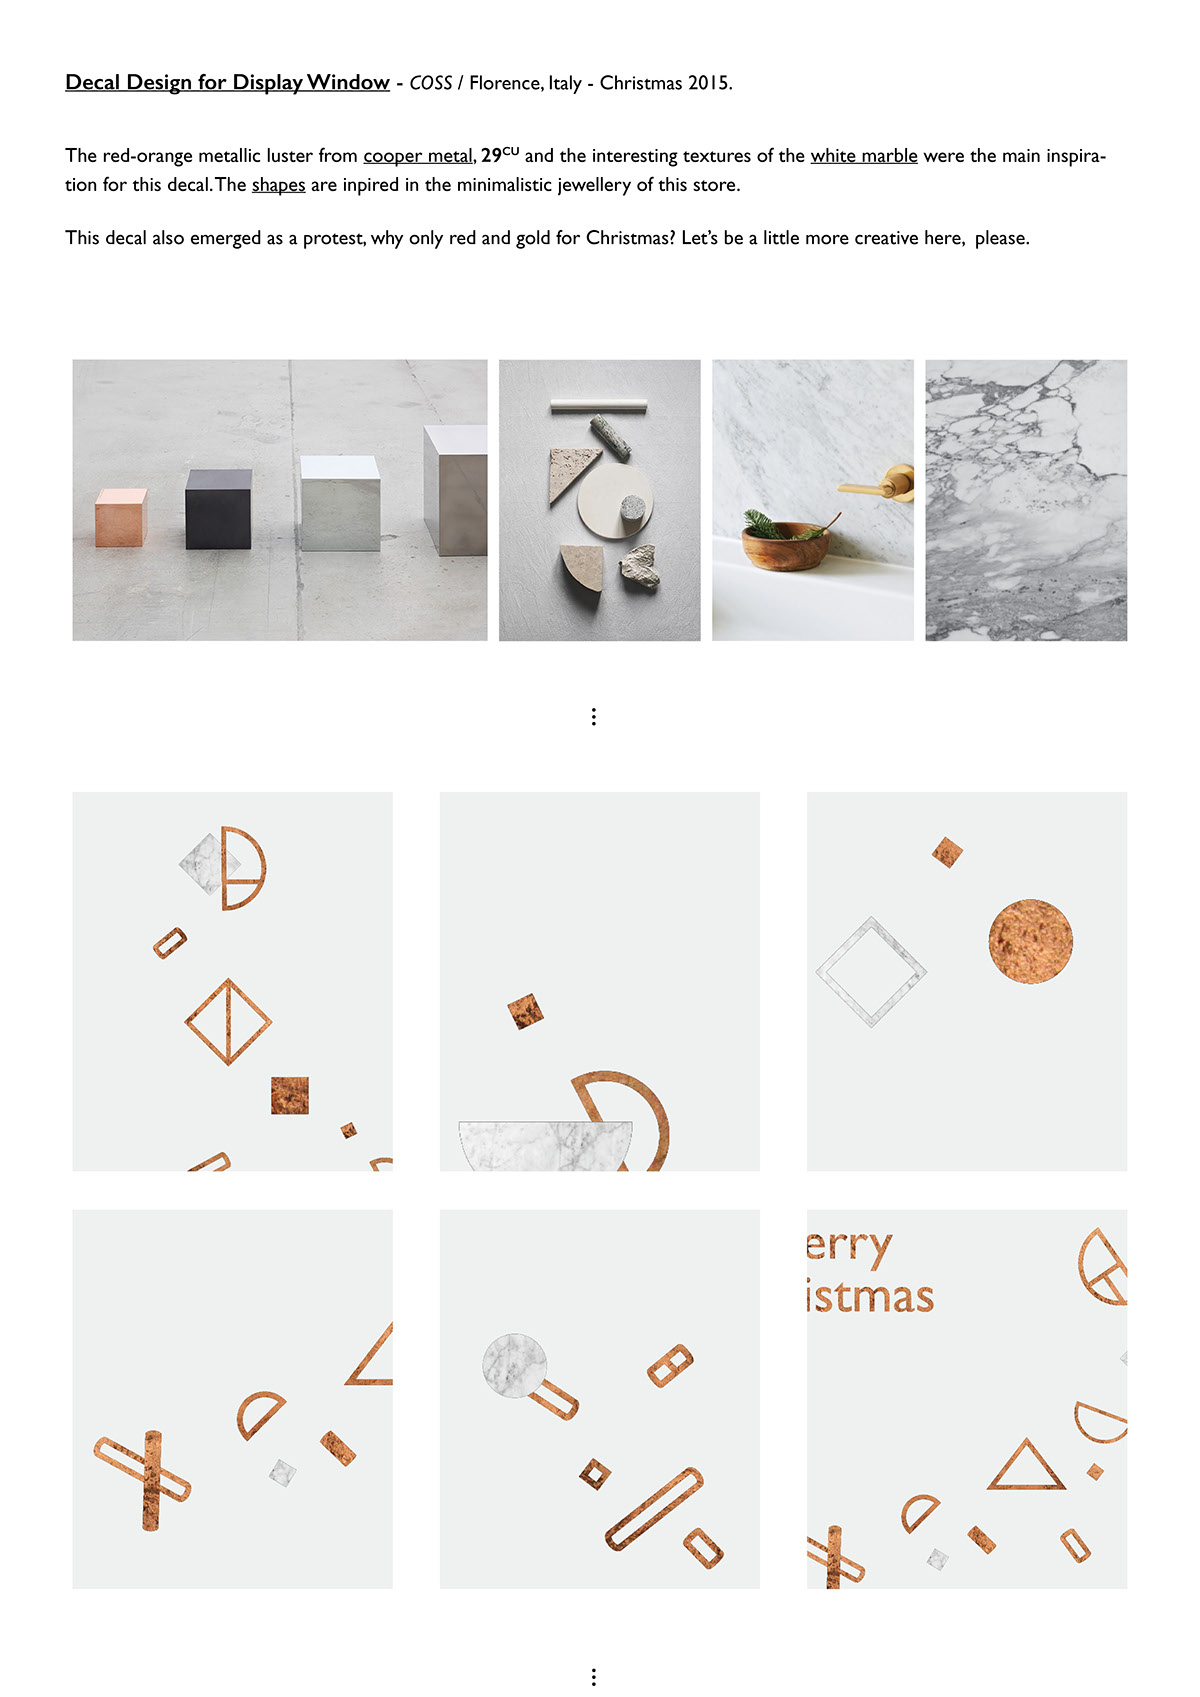 design store illustrations Christmas shapes minimalistic Marble cooper materials textures minerals Florence Italy art